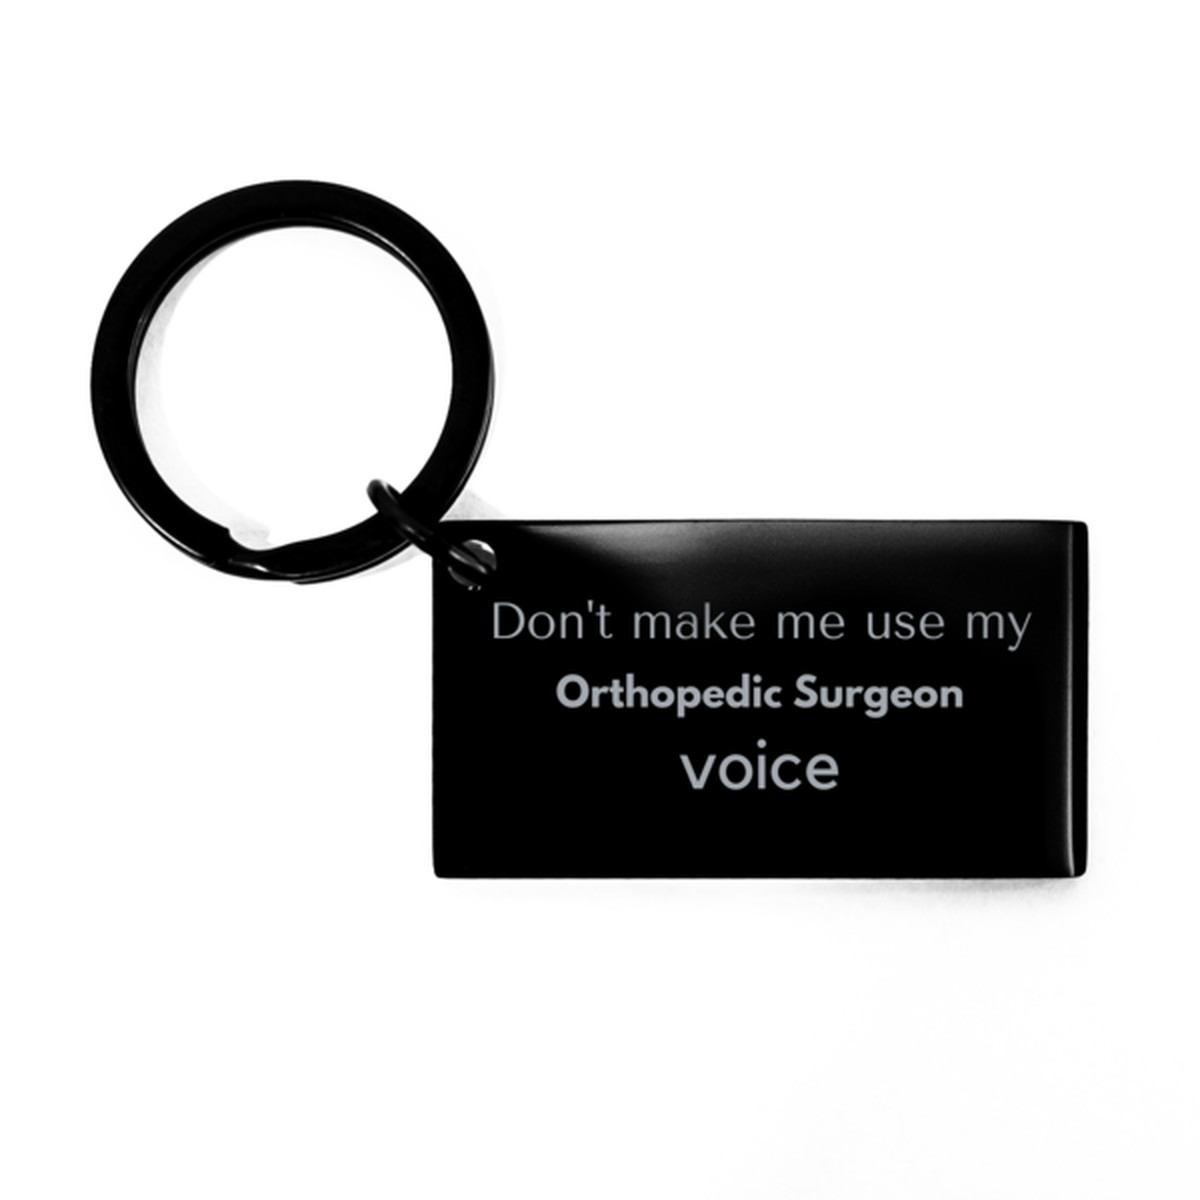 Don't make me use my Orthopedic Surgeon voice, Sarcasm Orthopedic Surgeon Gifts, Christmas Orthopedic Surgeon Keychain Birthday Unique Gifts For Orthopedic Surgeon Coworkers, Men, Women, Colleague, Friends